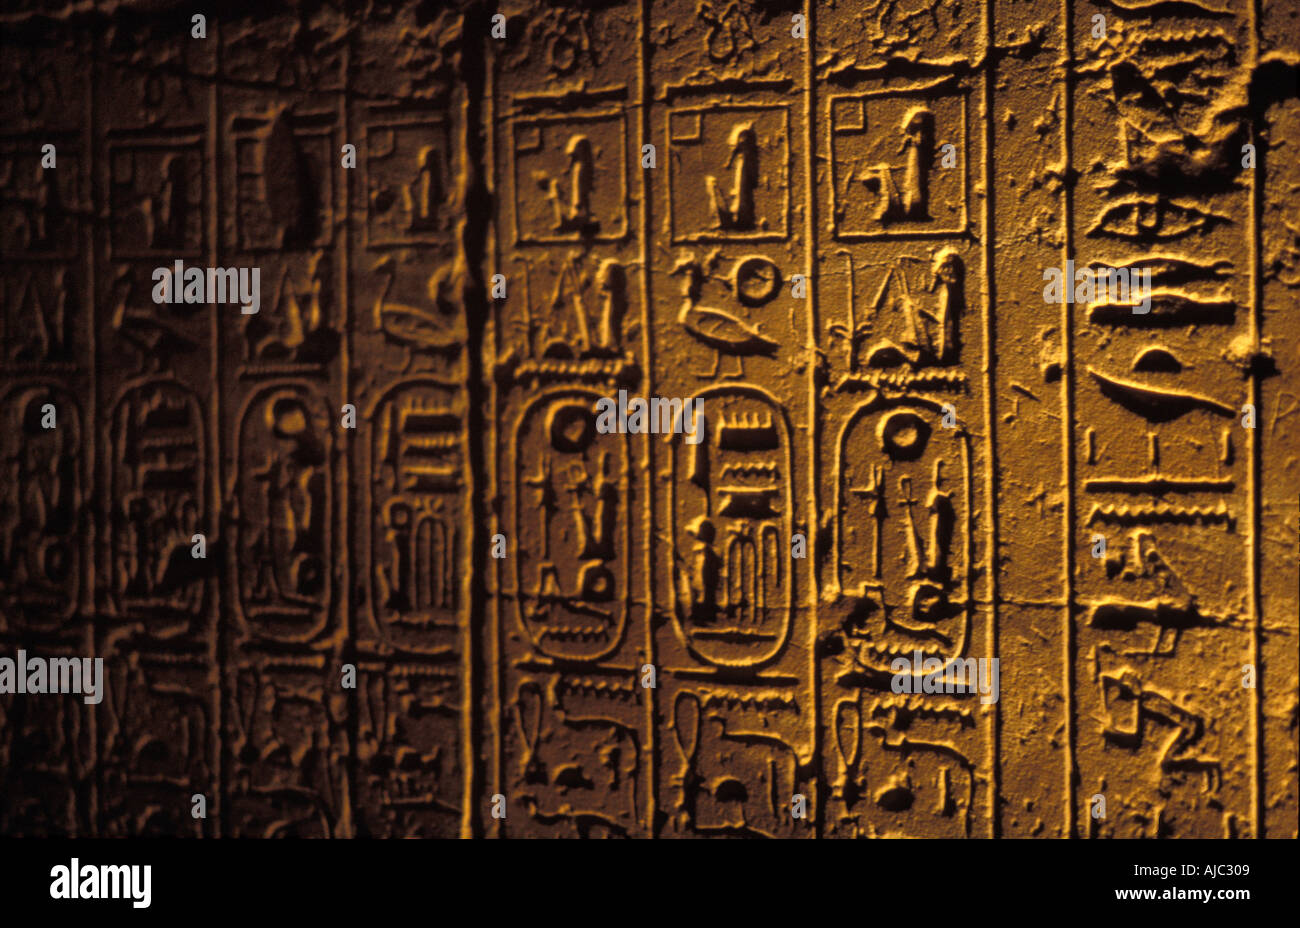 Luxor Temple Egyptial antiquities hieroglyphic carvings on temple wall Luxor Egypt Stock Photo